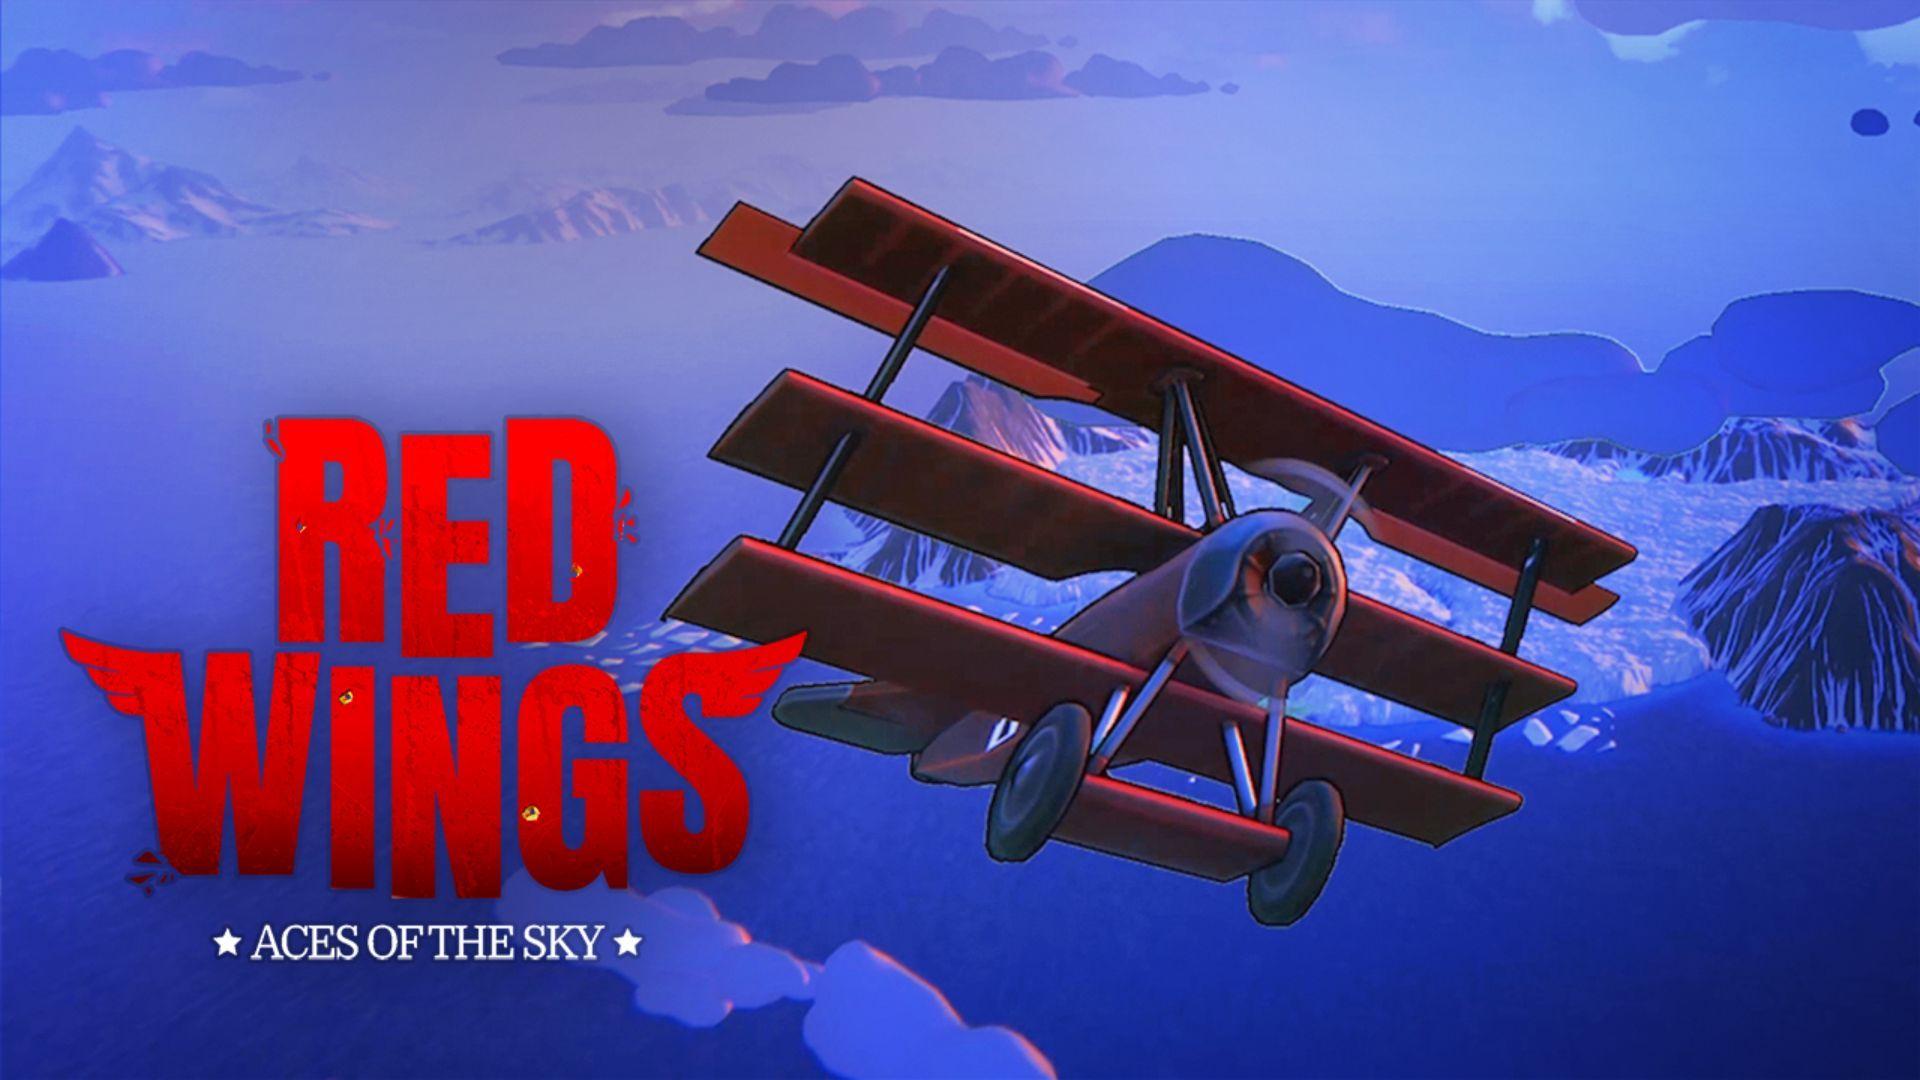 Free Red Wings Aces of the Sky PC Game